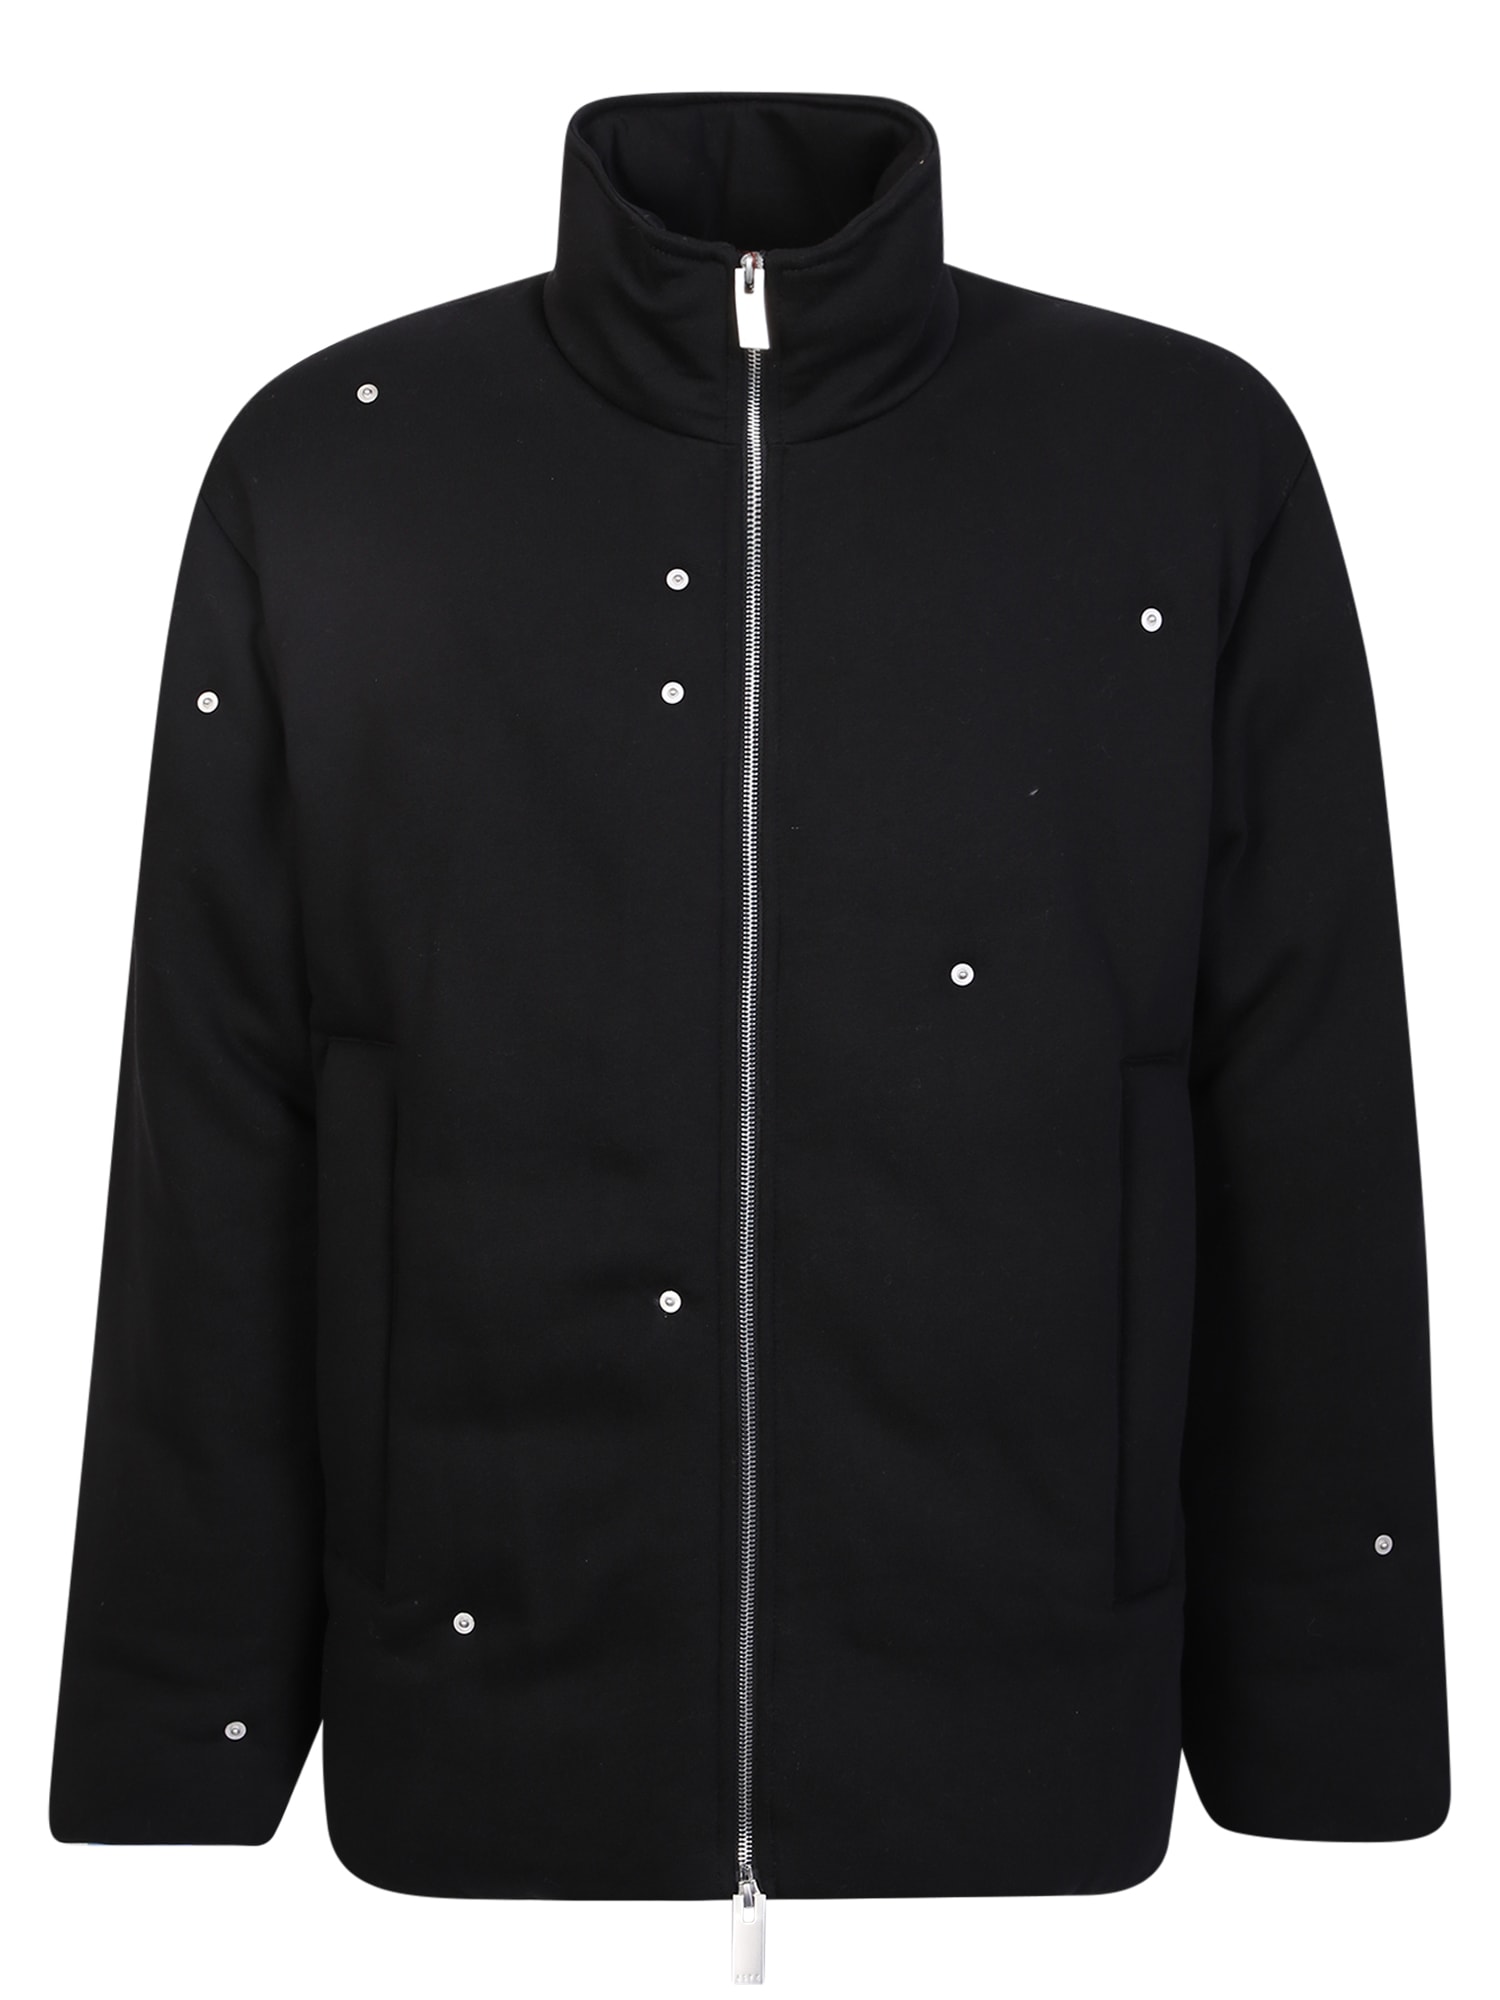 Black Fleece Down Jacket With Buttons